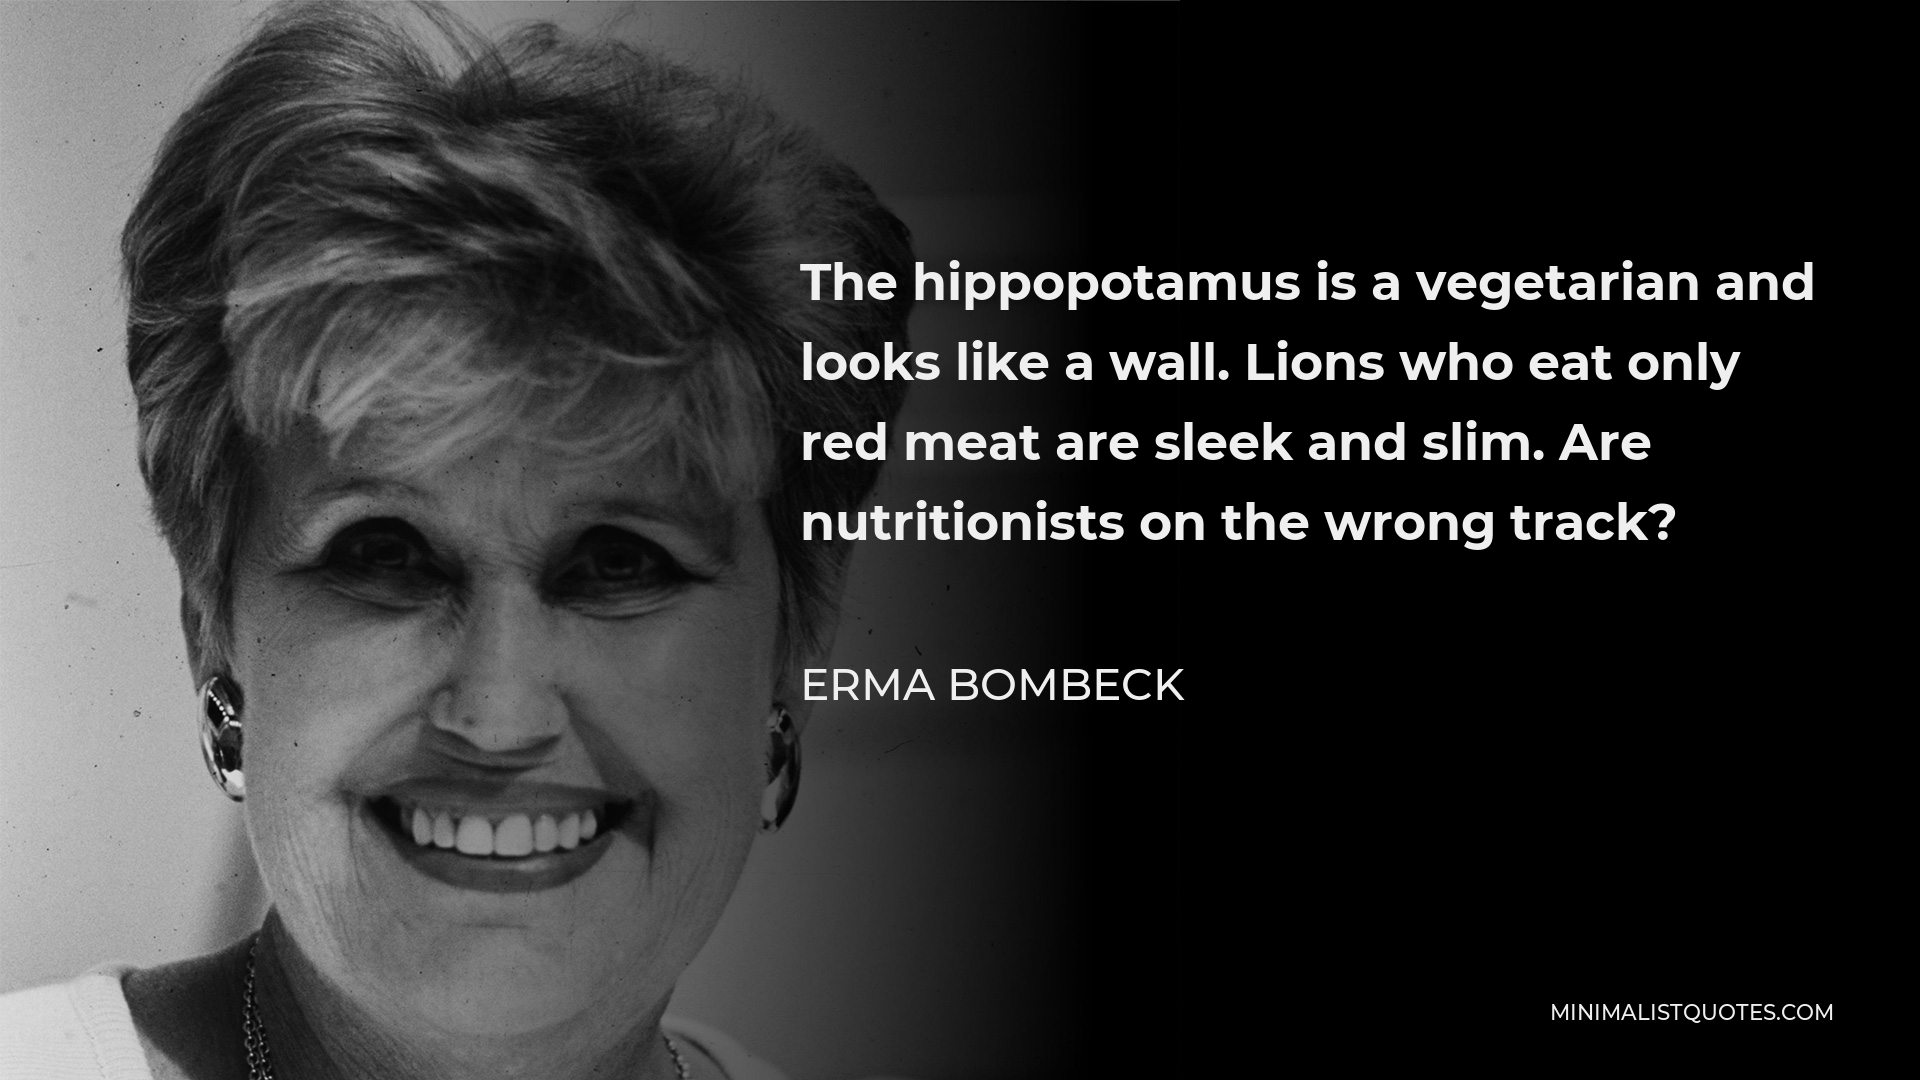 Erma Bombeck Quote - The hippopotamus is a vegetarian and looks like a wall. Lions who eat only red meat are sleek and slim. Are nutritionists on the wrong track?